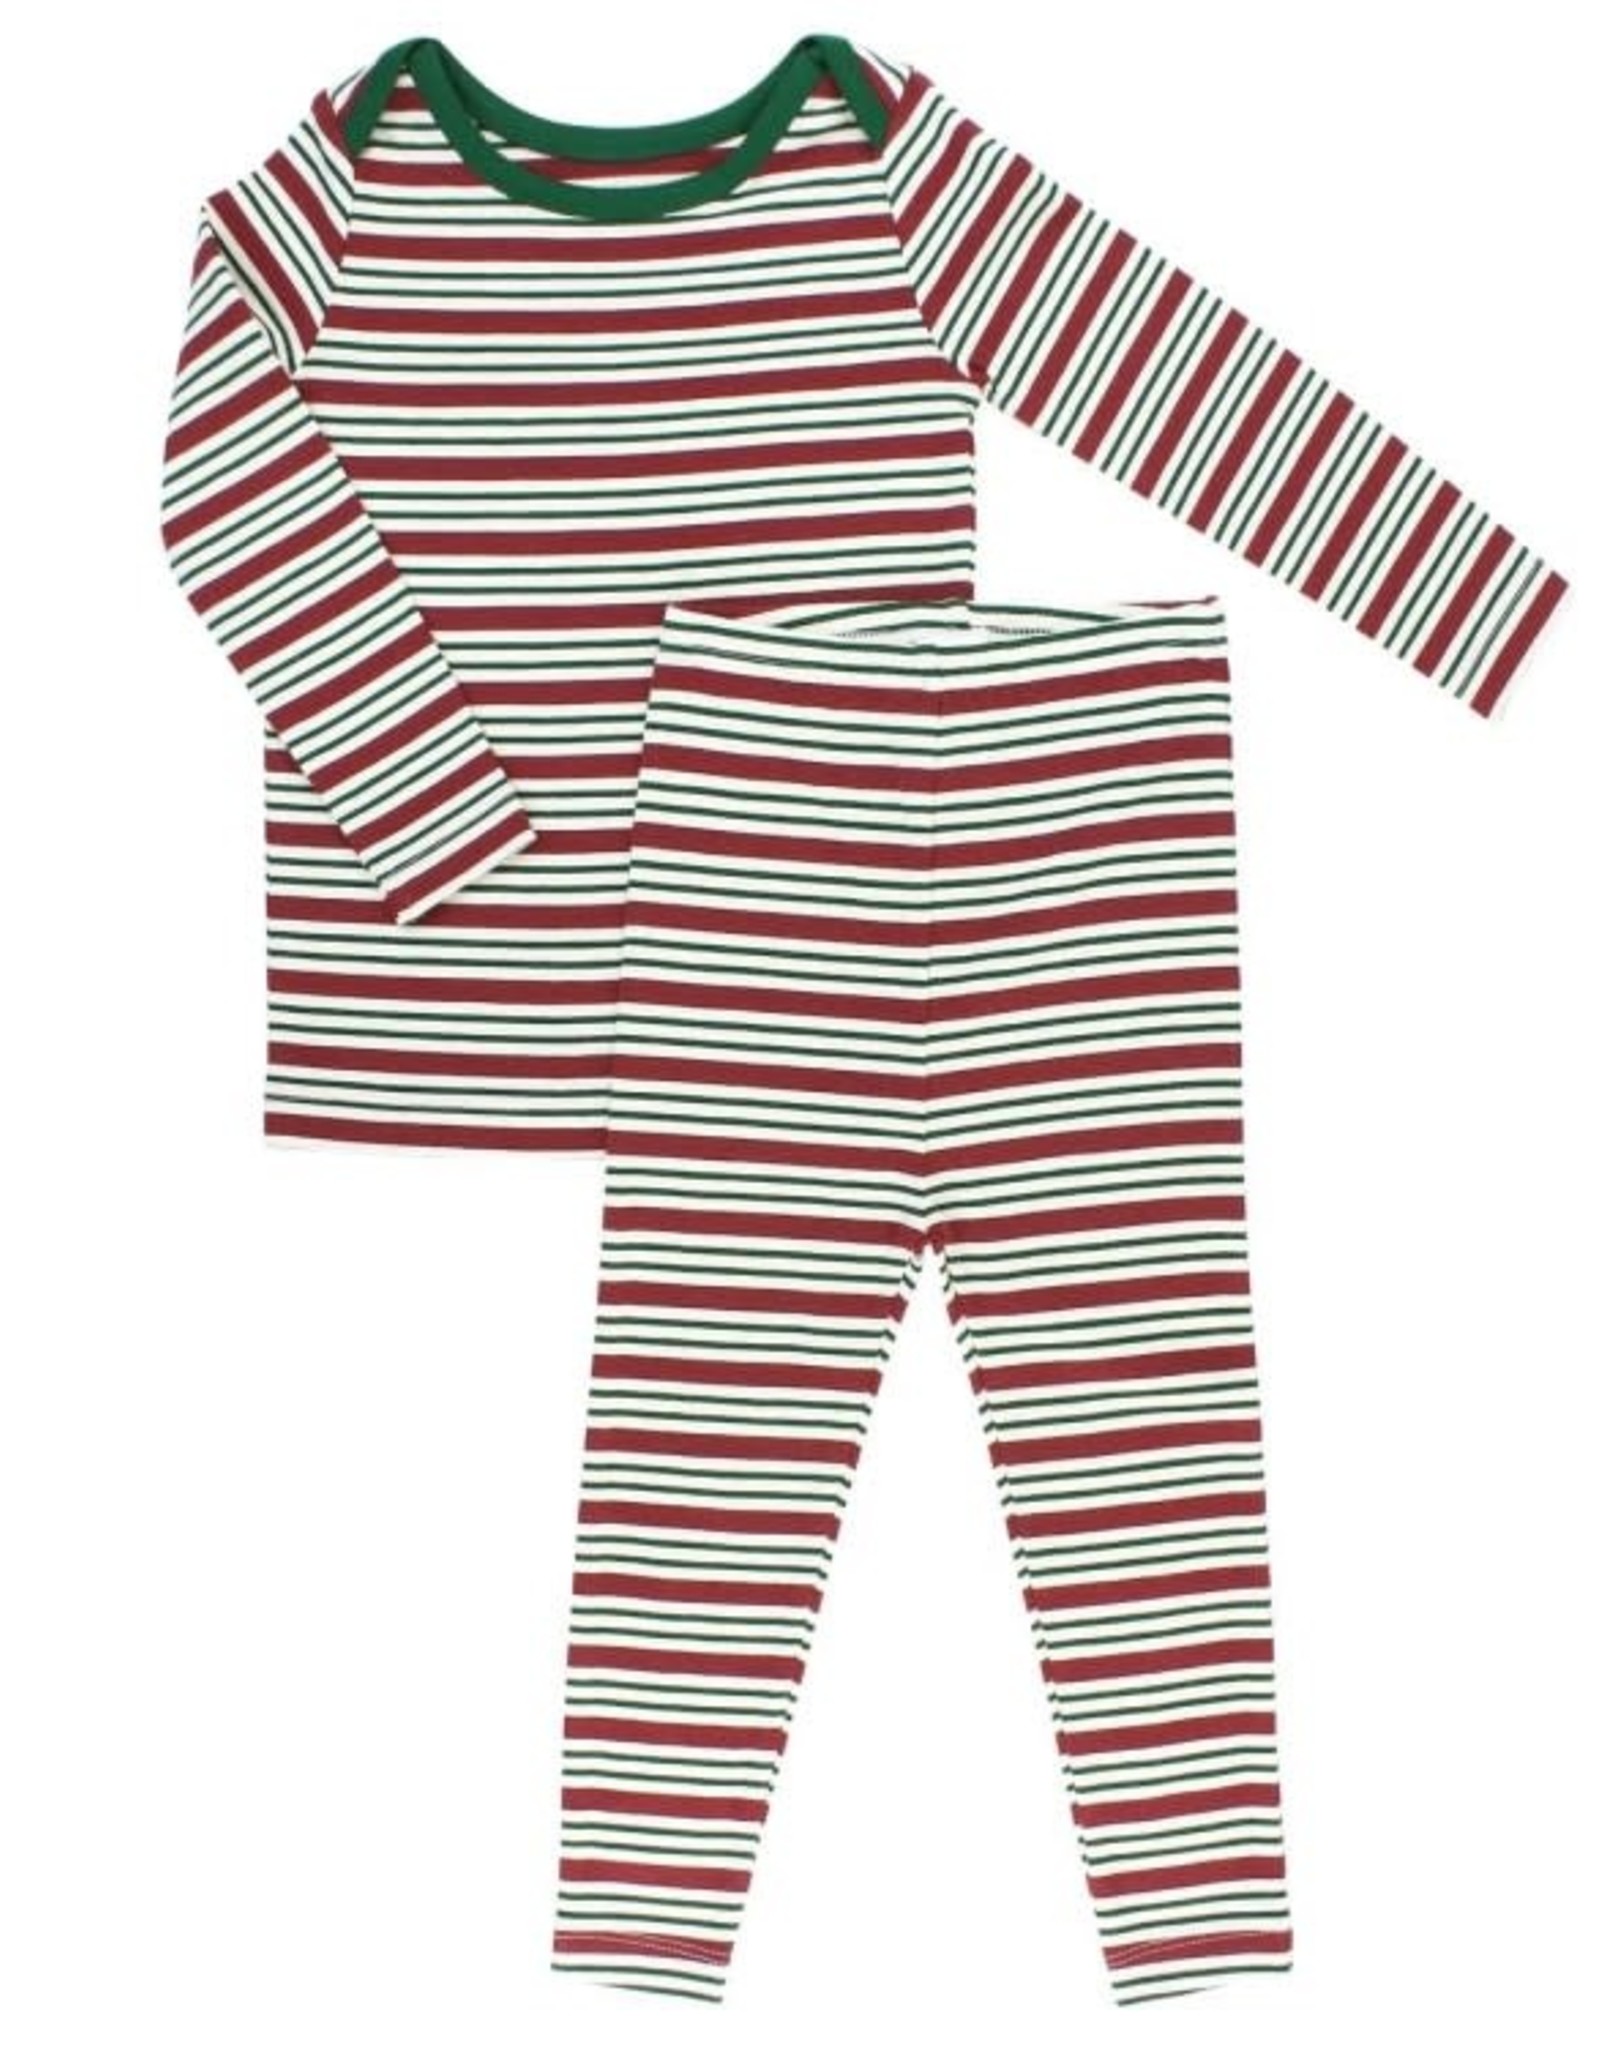 RuggedButts Peppermint Stripe Snuggly 2pc  Pajamas